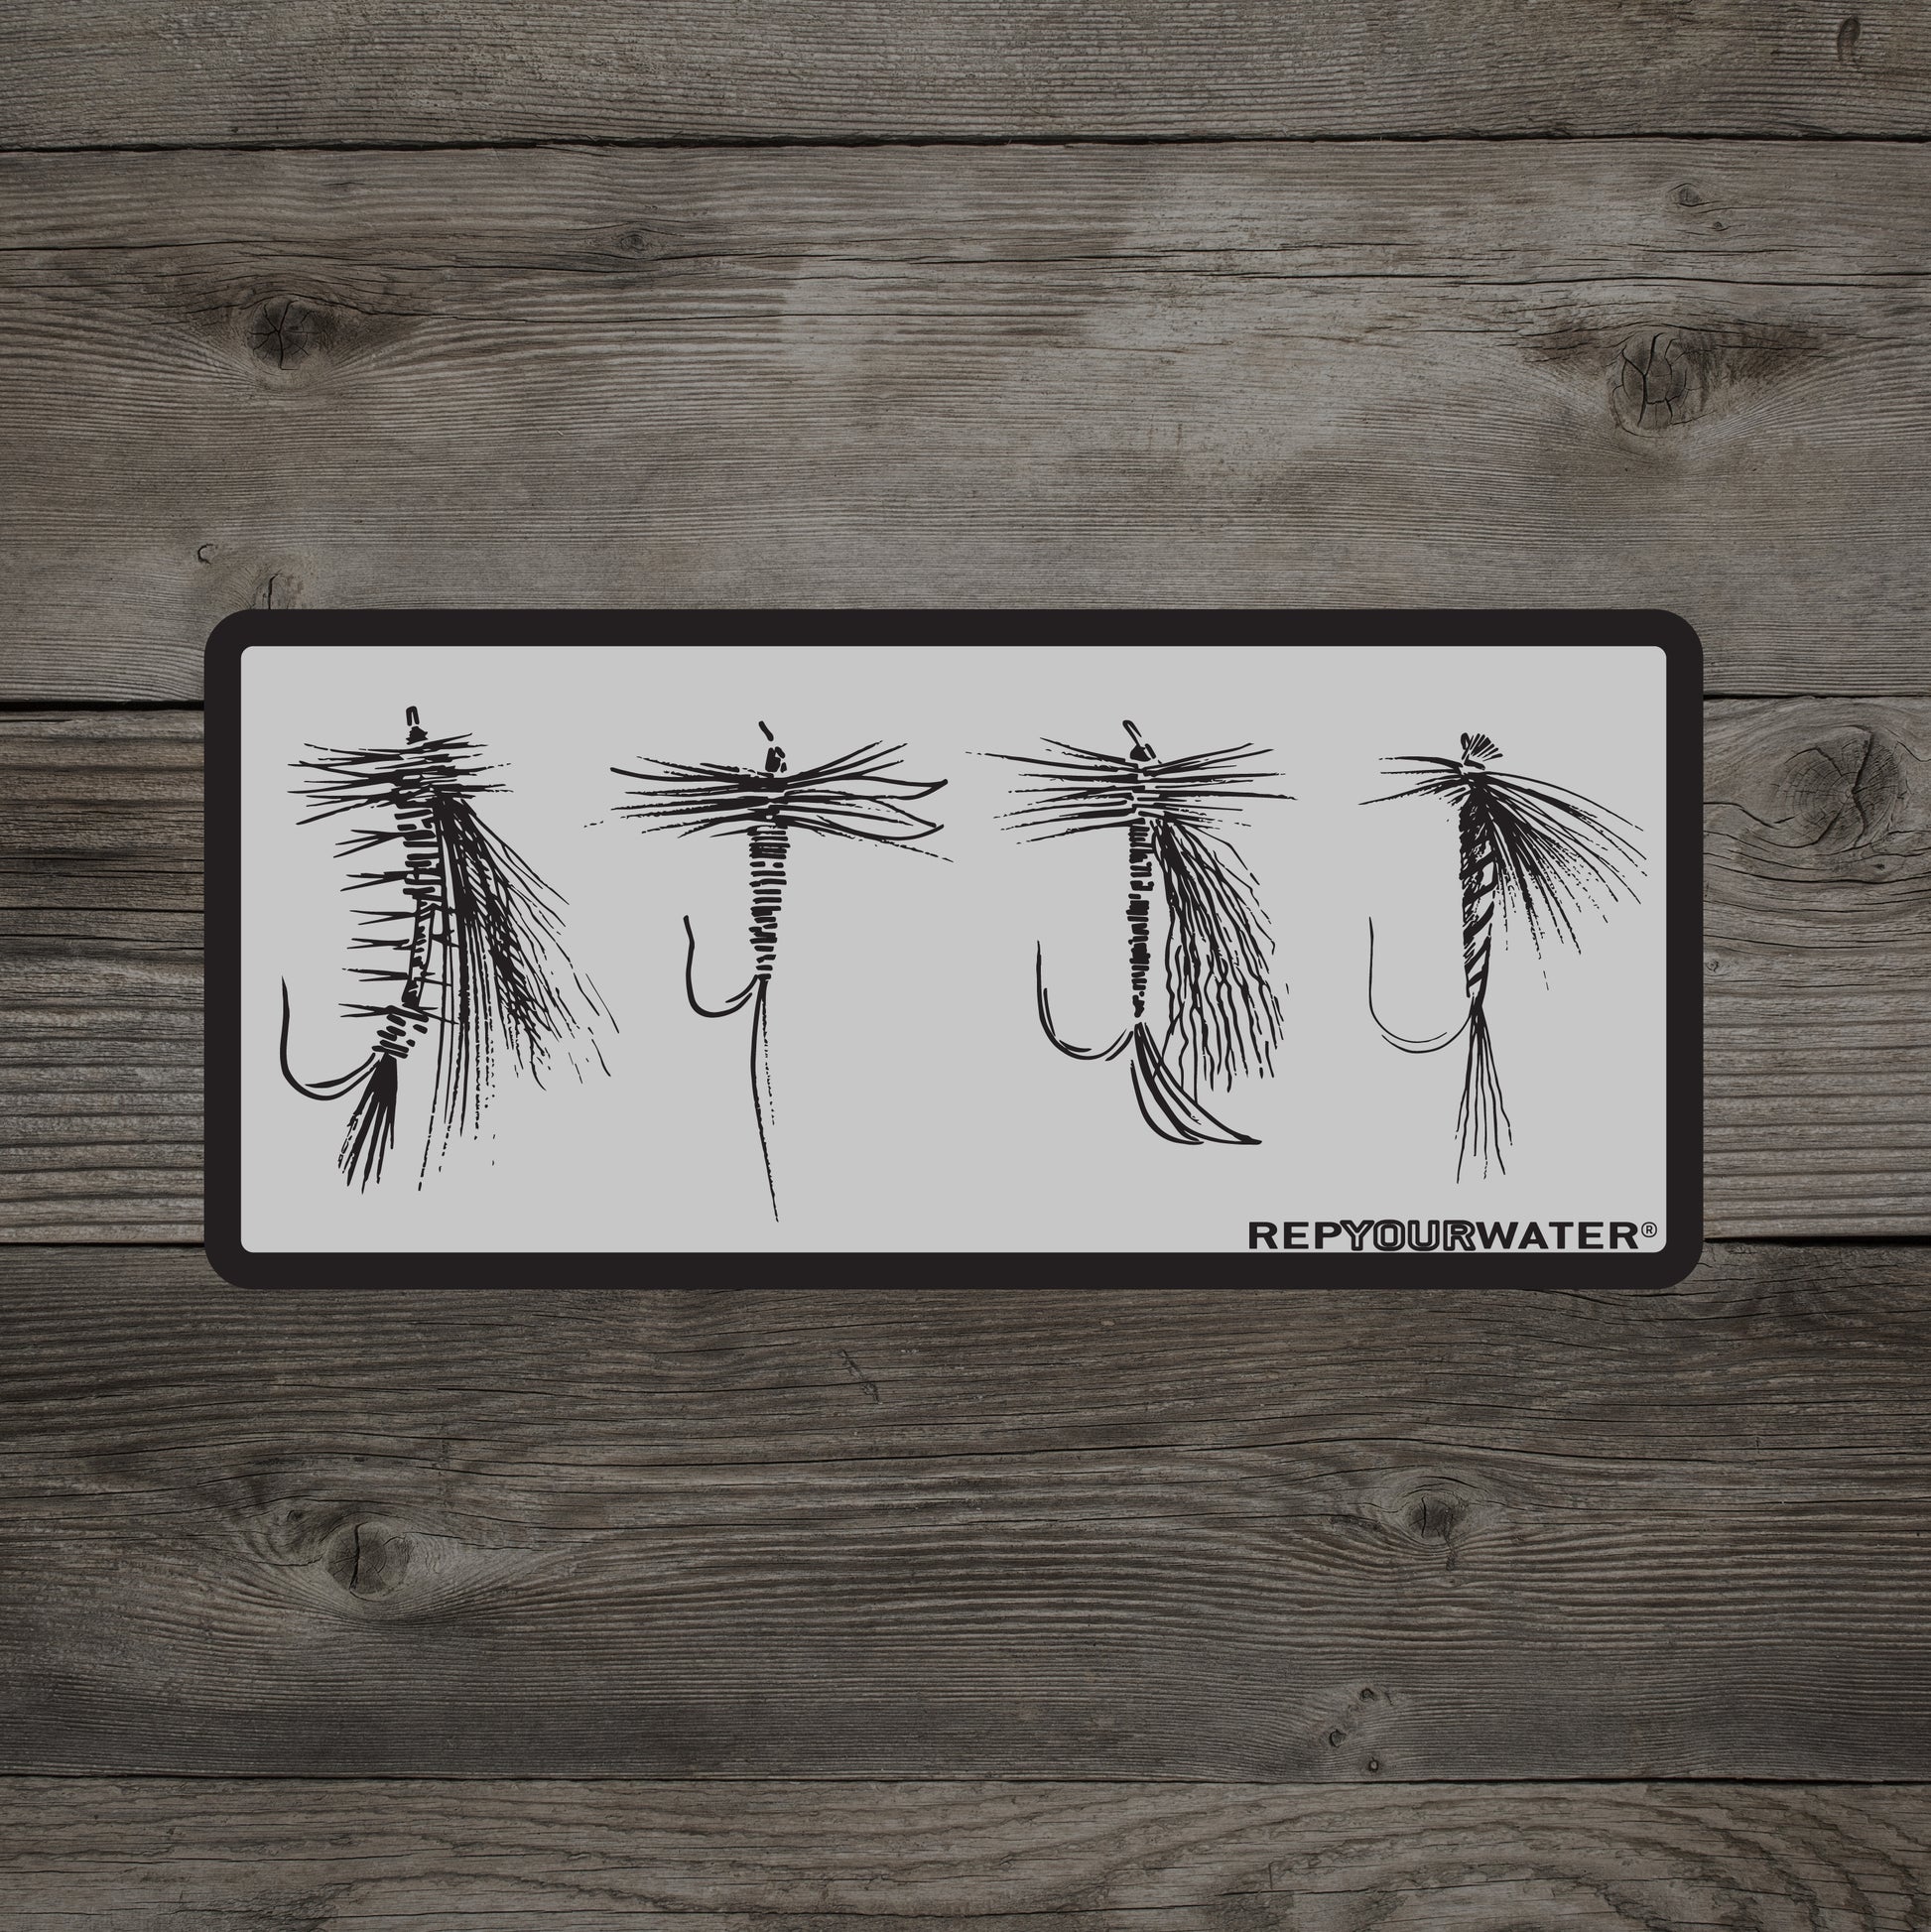 A wooden background has a sticker that shows four dry flies and the words repyourwater